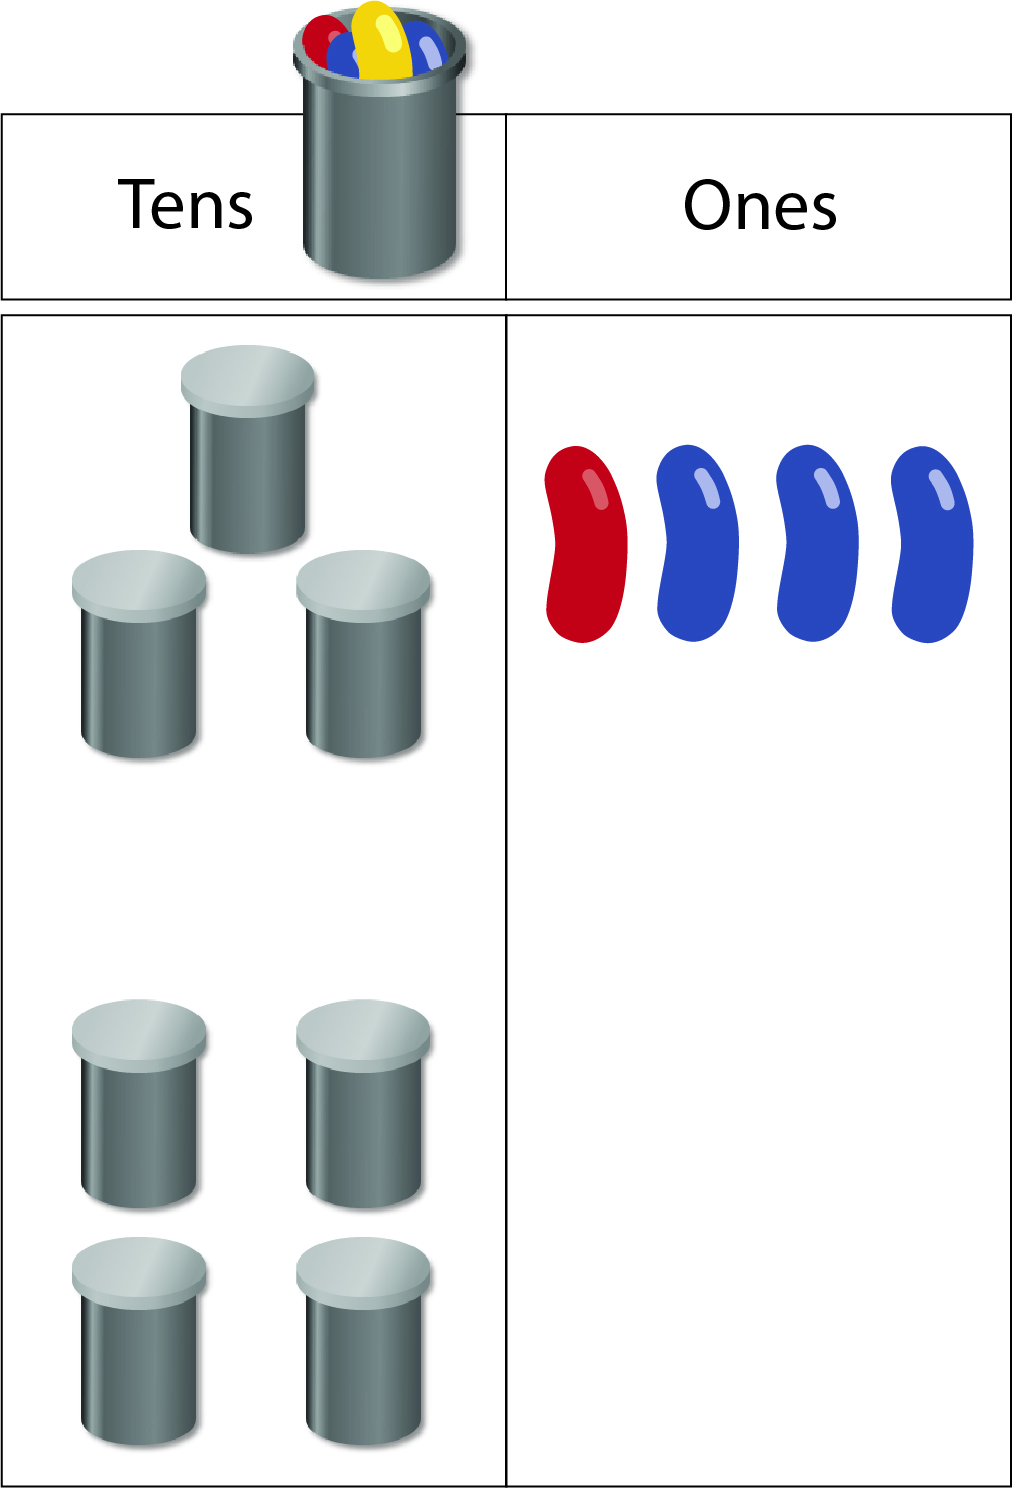 Image of a ten-bean canister being adding to seven existing ten-bean canisters in the tens column of a place value board. The ones column displays four individual beans.